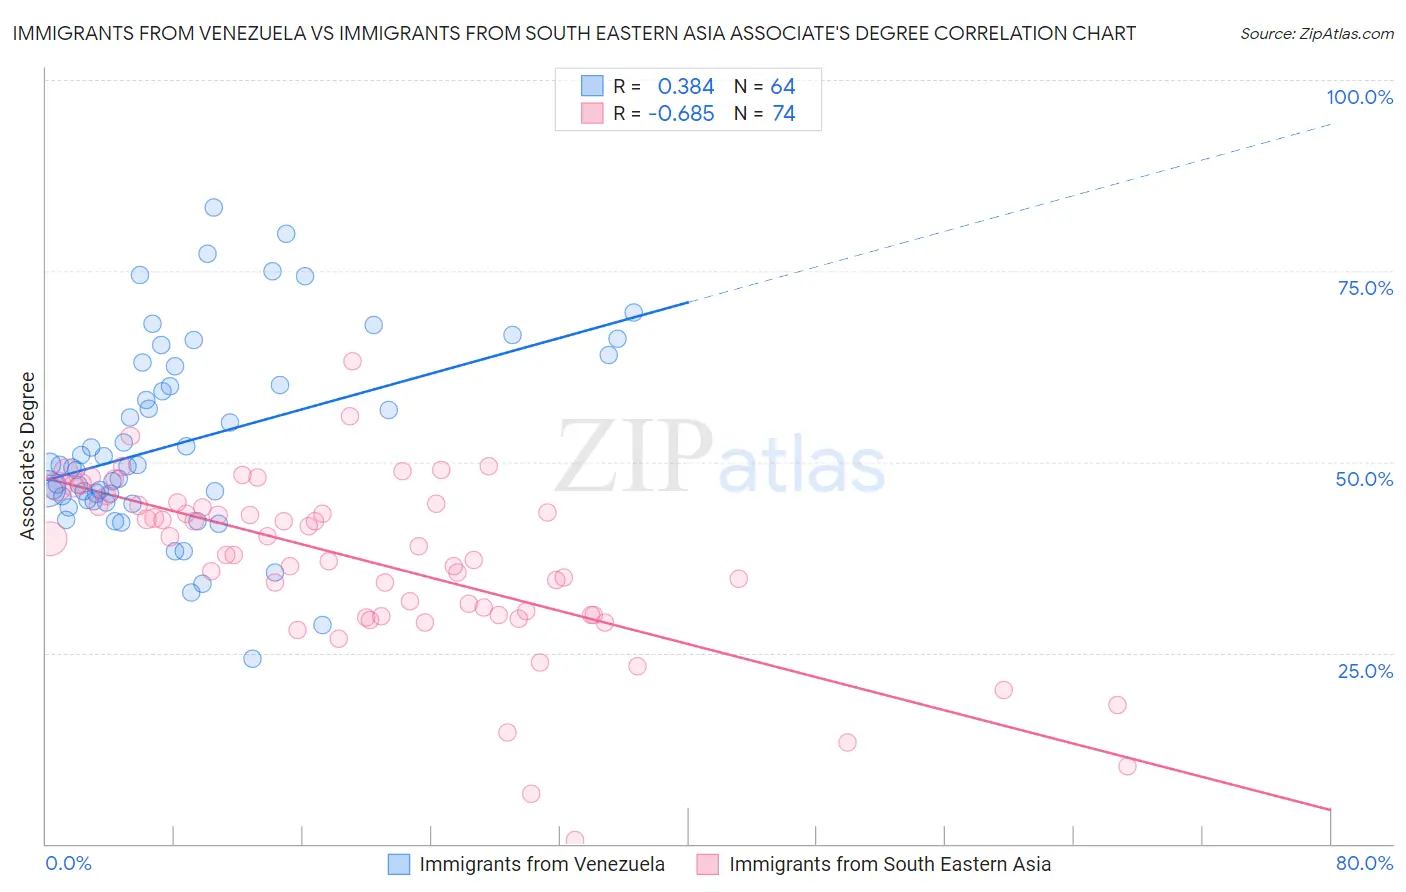 Immigrants from Venezuela vs Immigrants from South Eastern Asia Associate's Degree